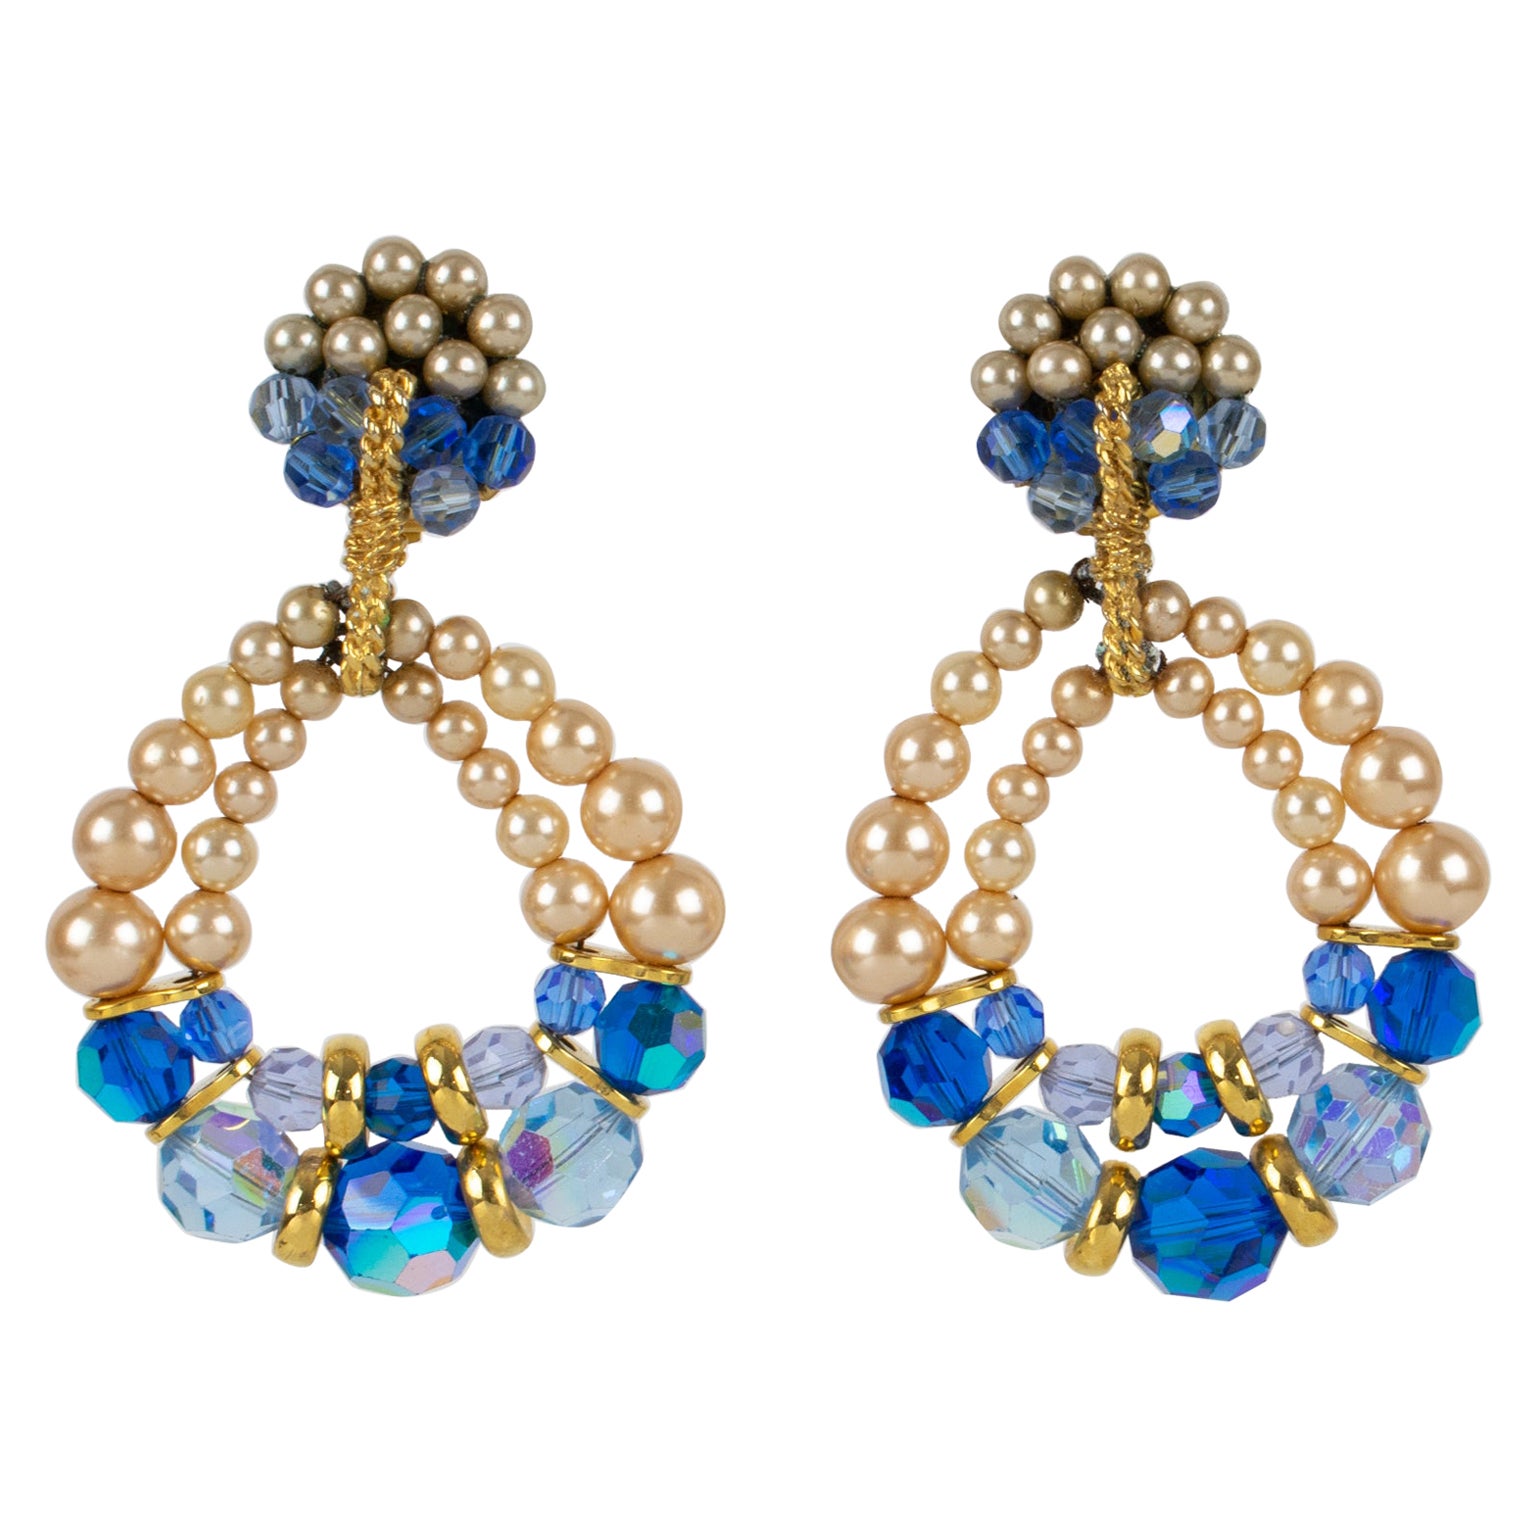 Francoise Montague Paris Blue Crystal and Pearls Dangle Clip Earrings For Sale